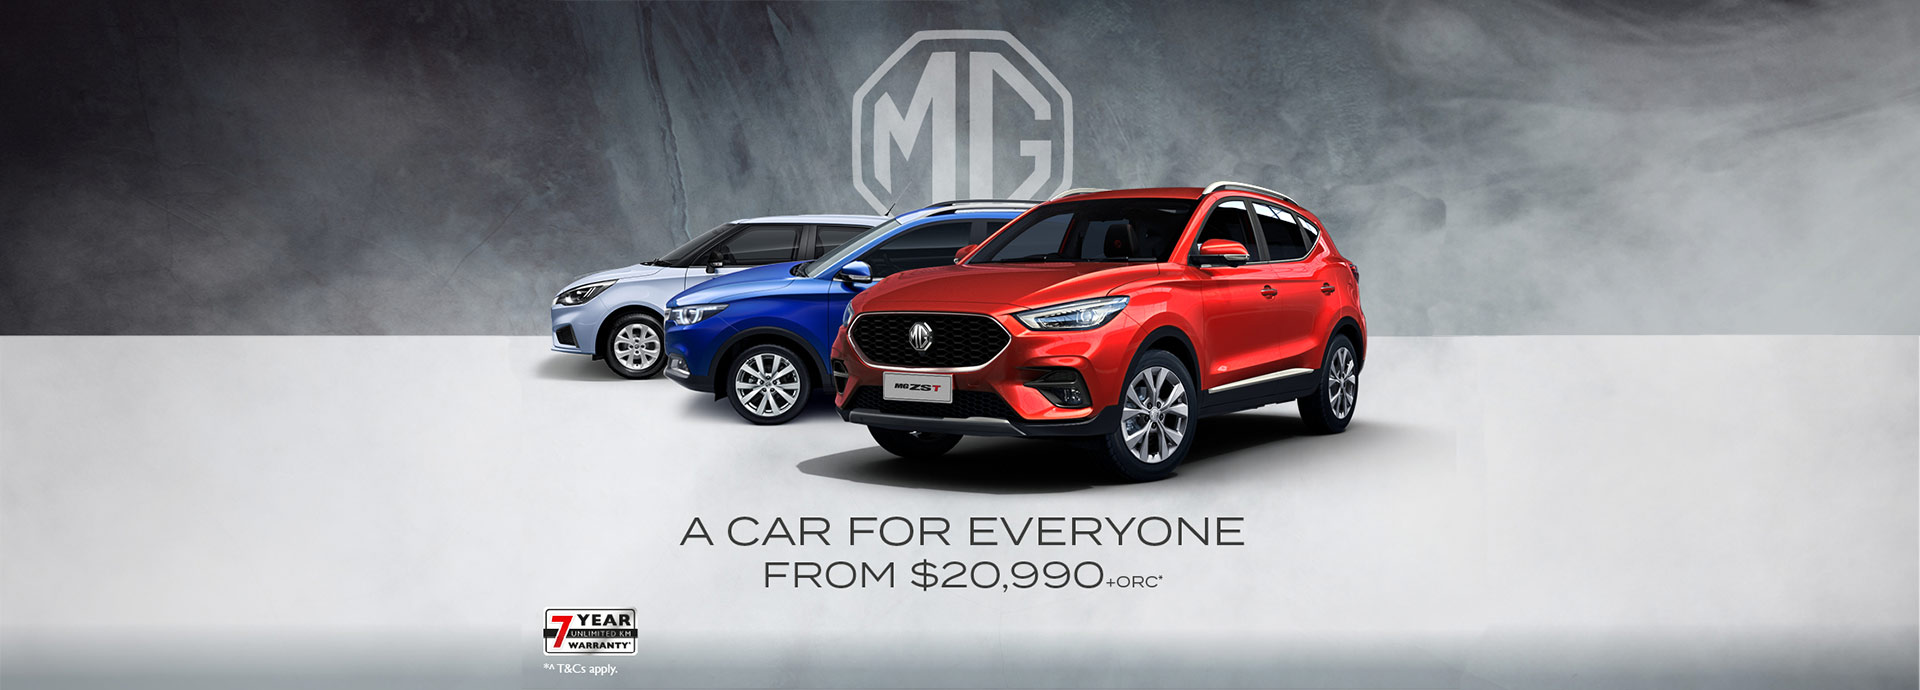 MG A car for Everyone 